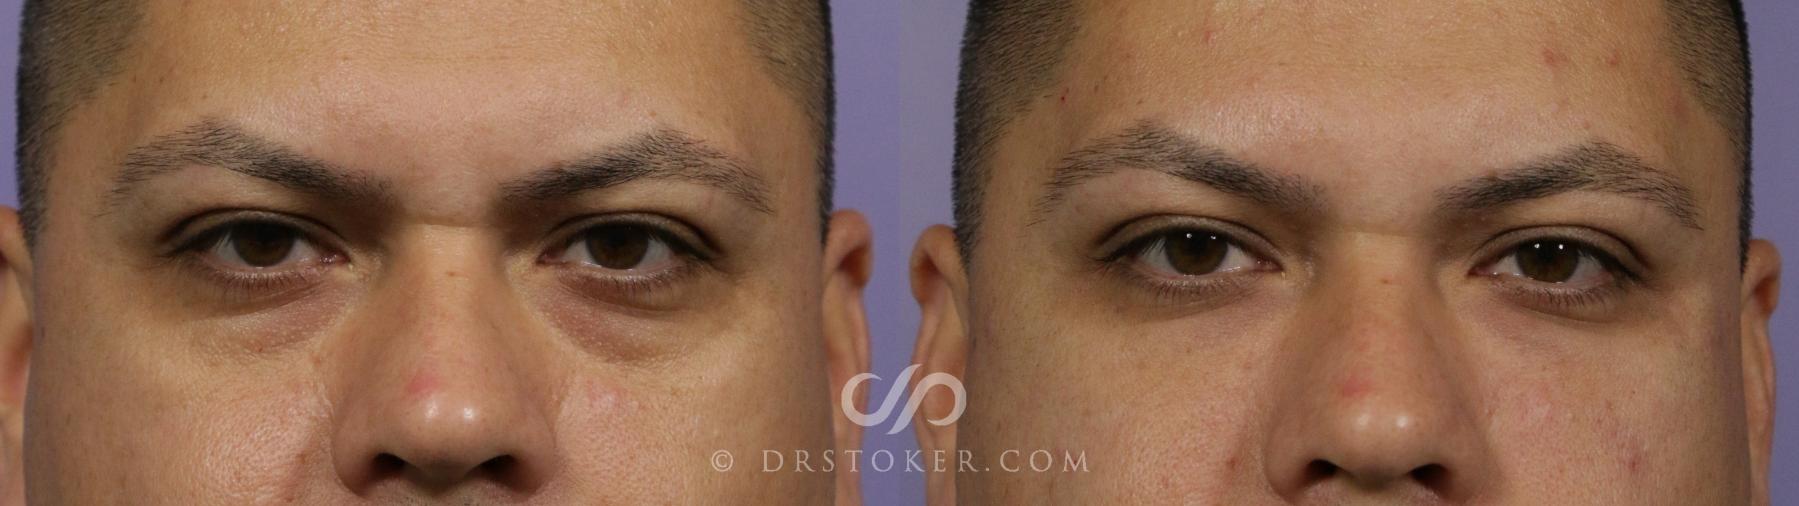 Before & After Undereye Fillers Case 1852 Front View in Los Angeles, CA